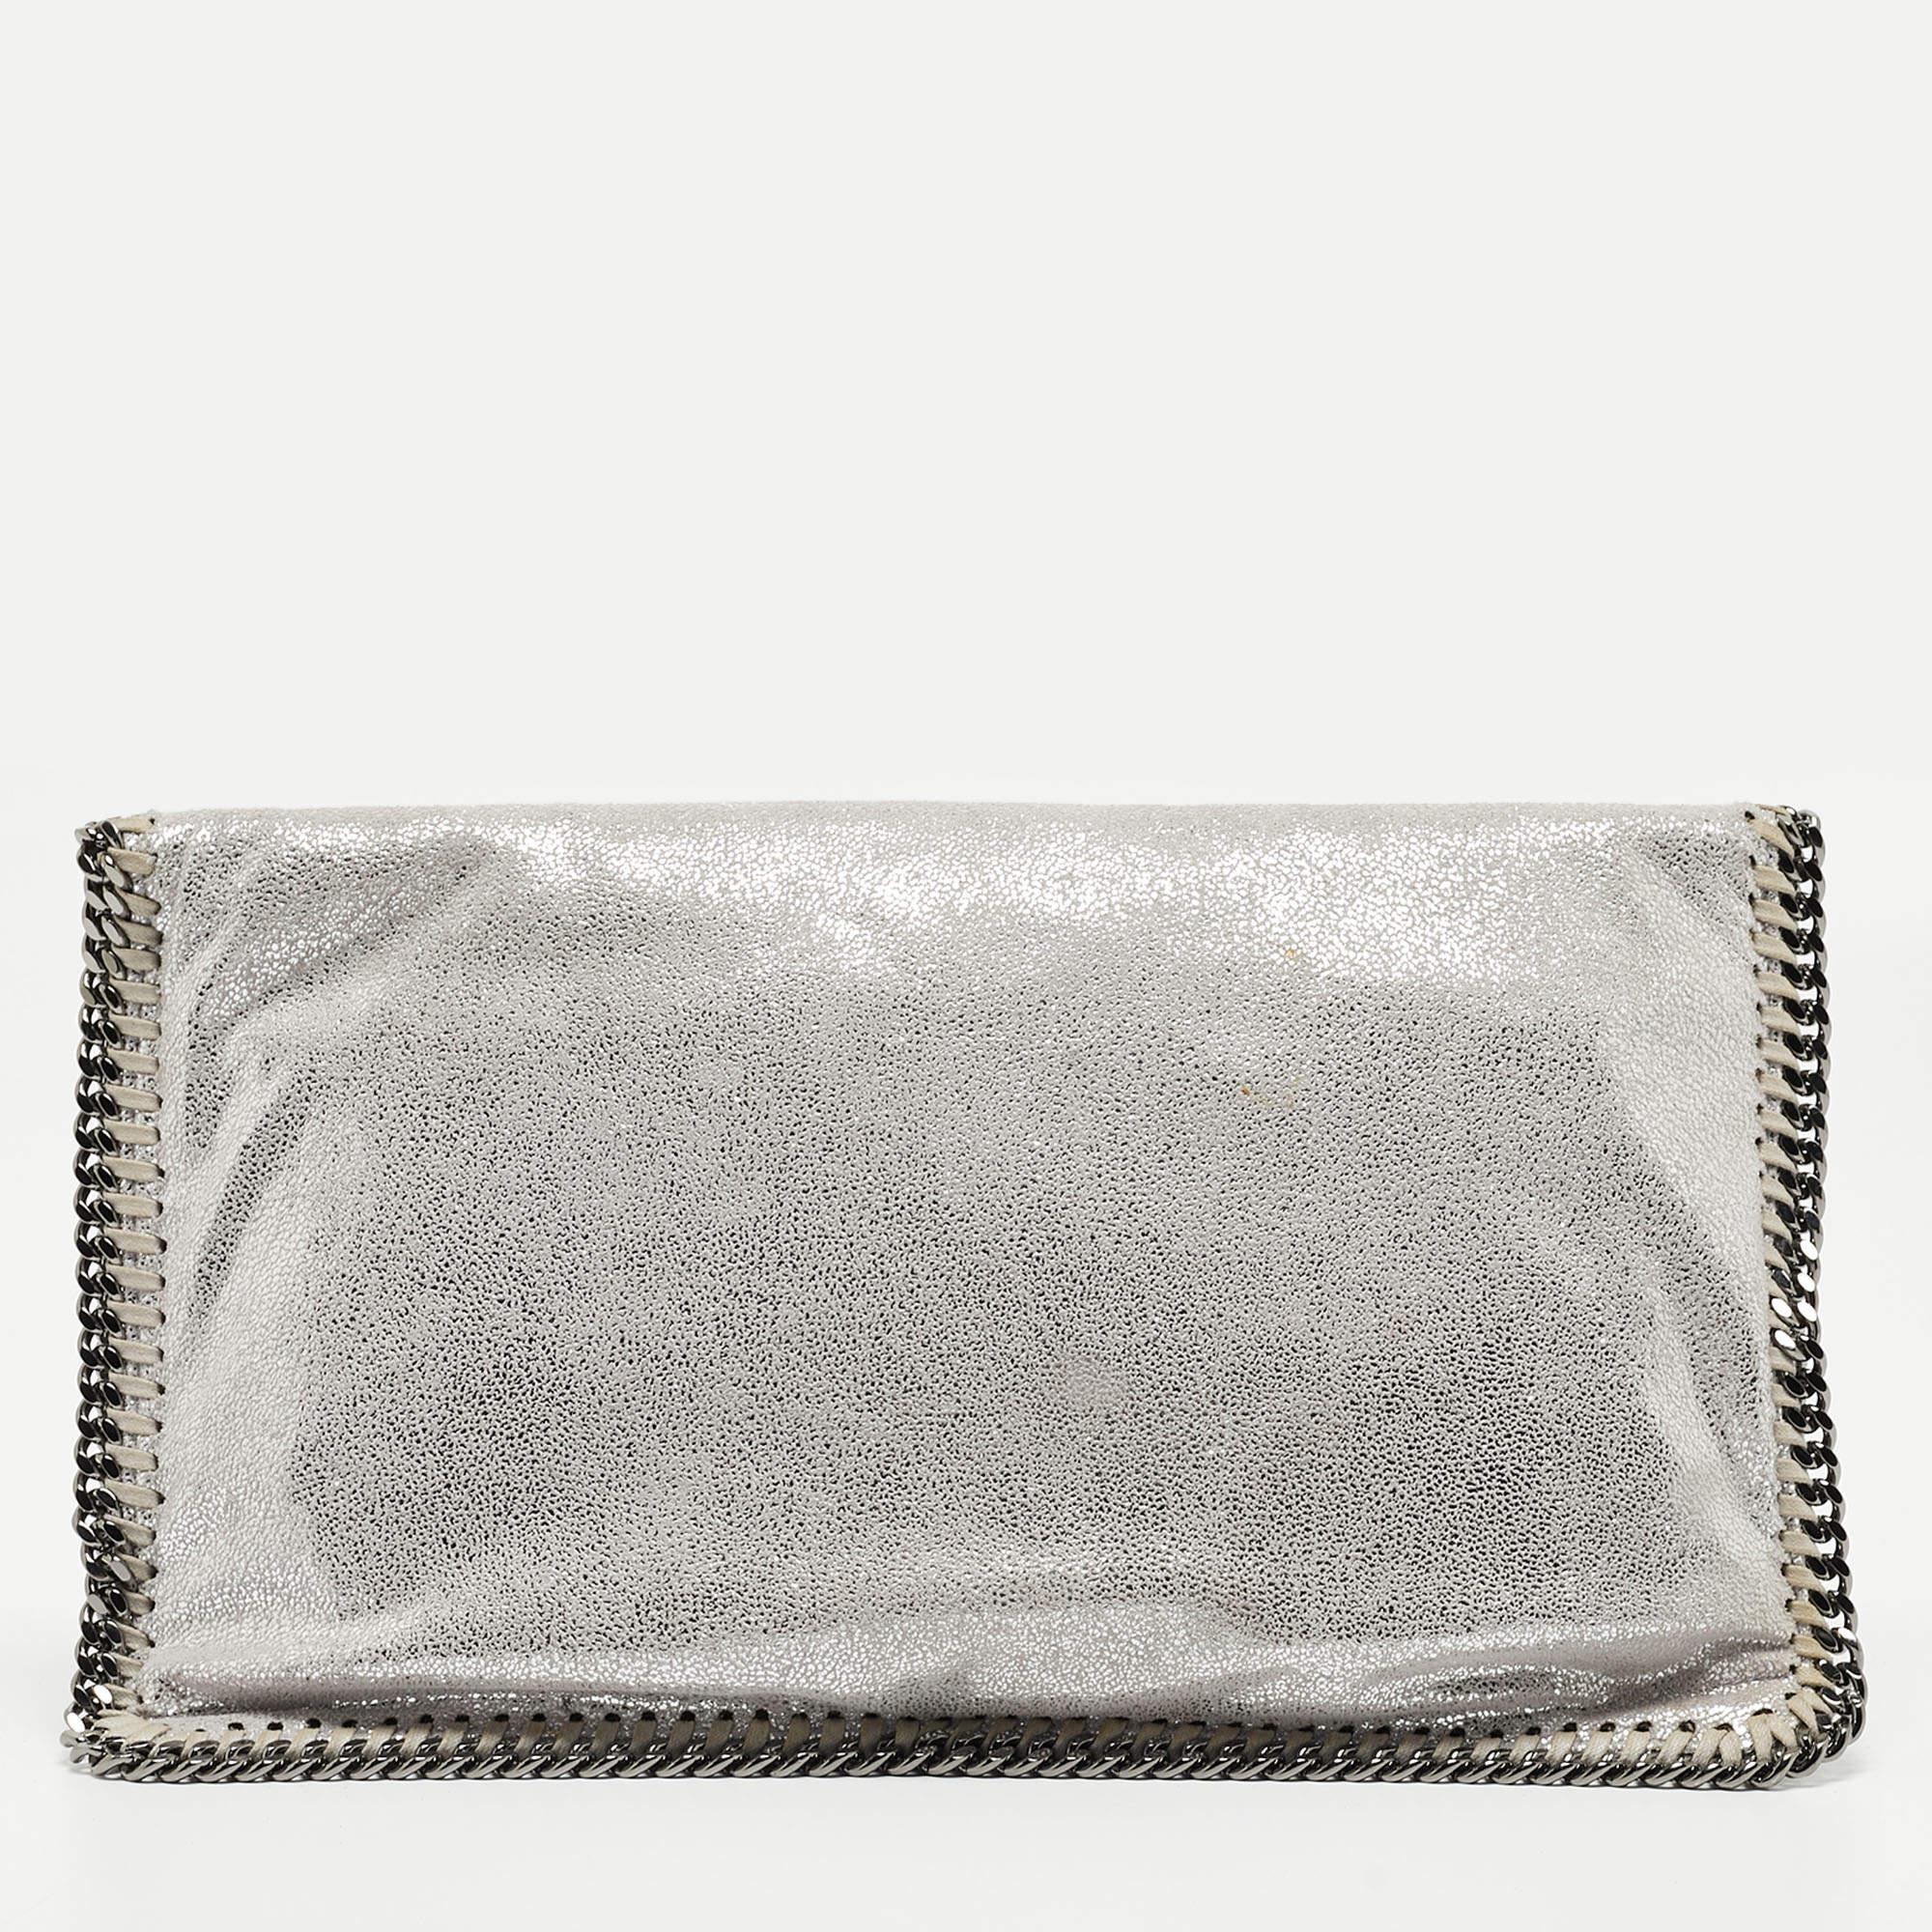 Stella McCartney Silver Faux Leather Falabella Fold-Over Clutch For Sale 7